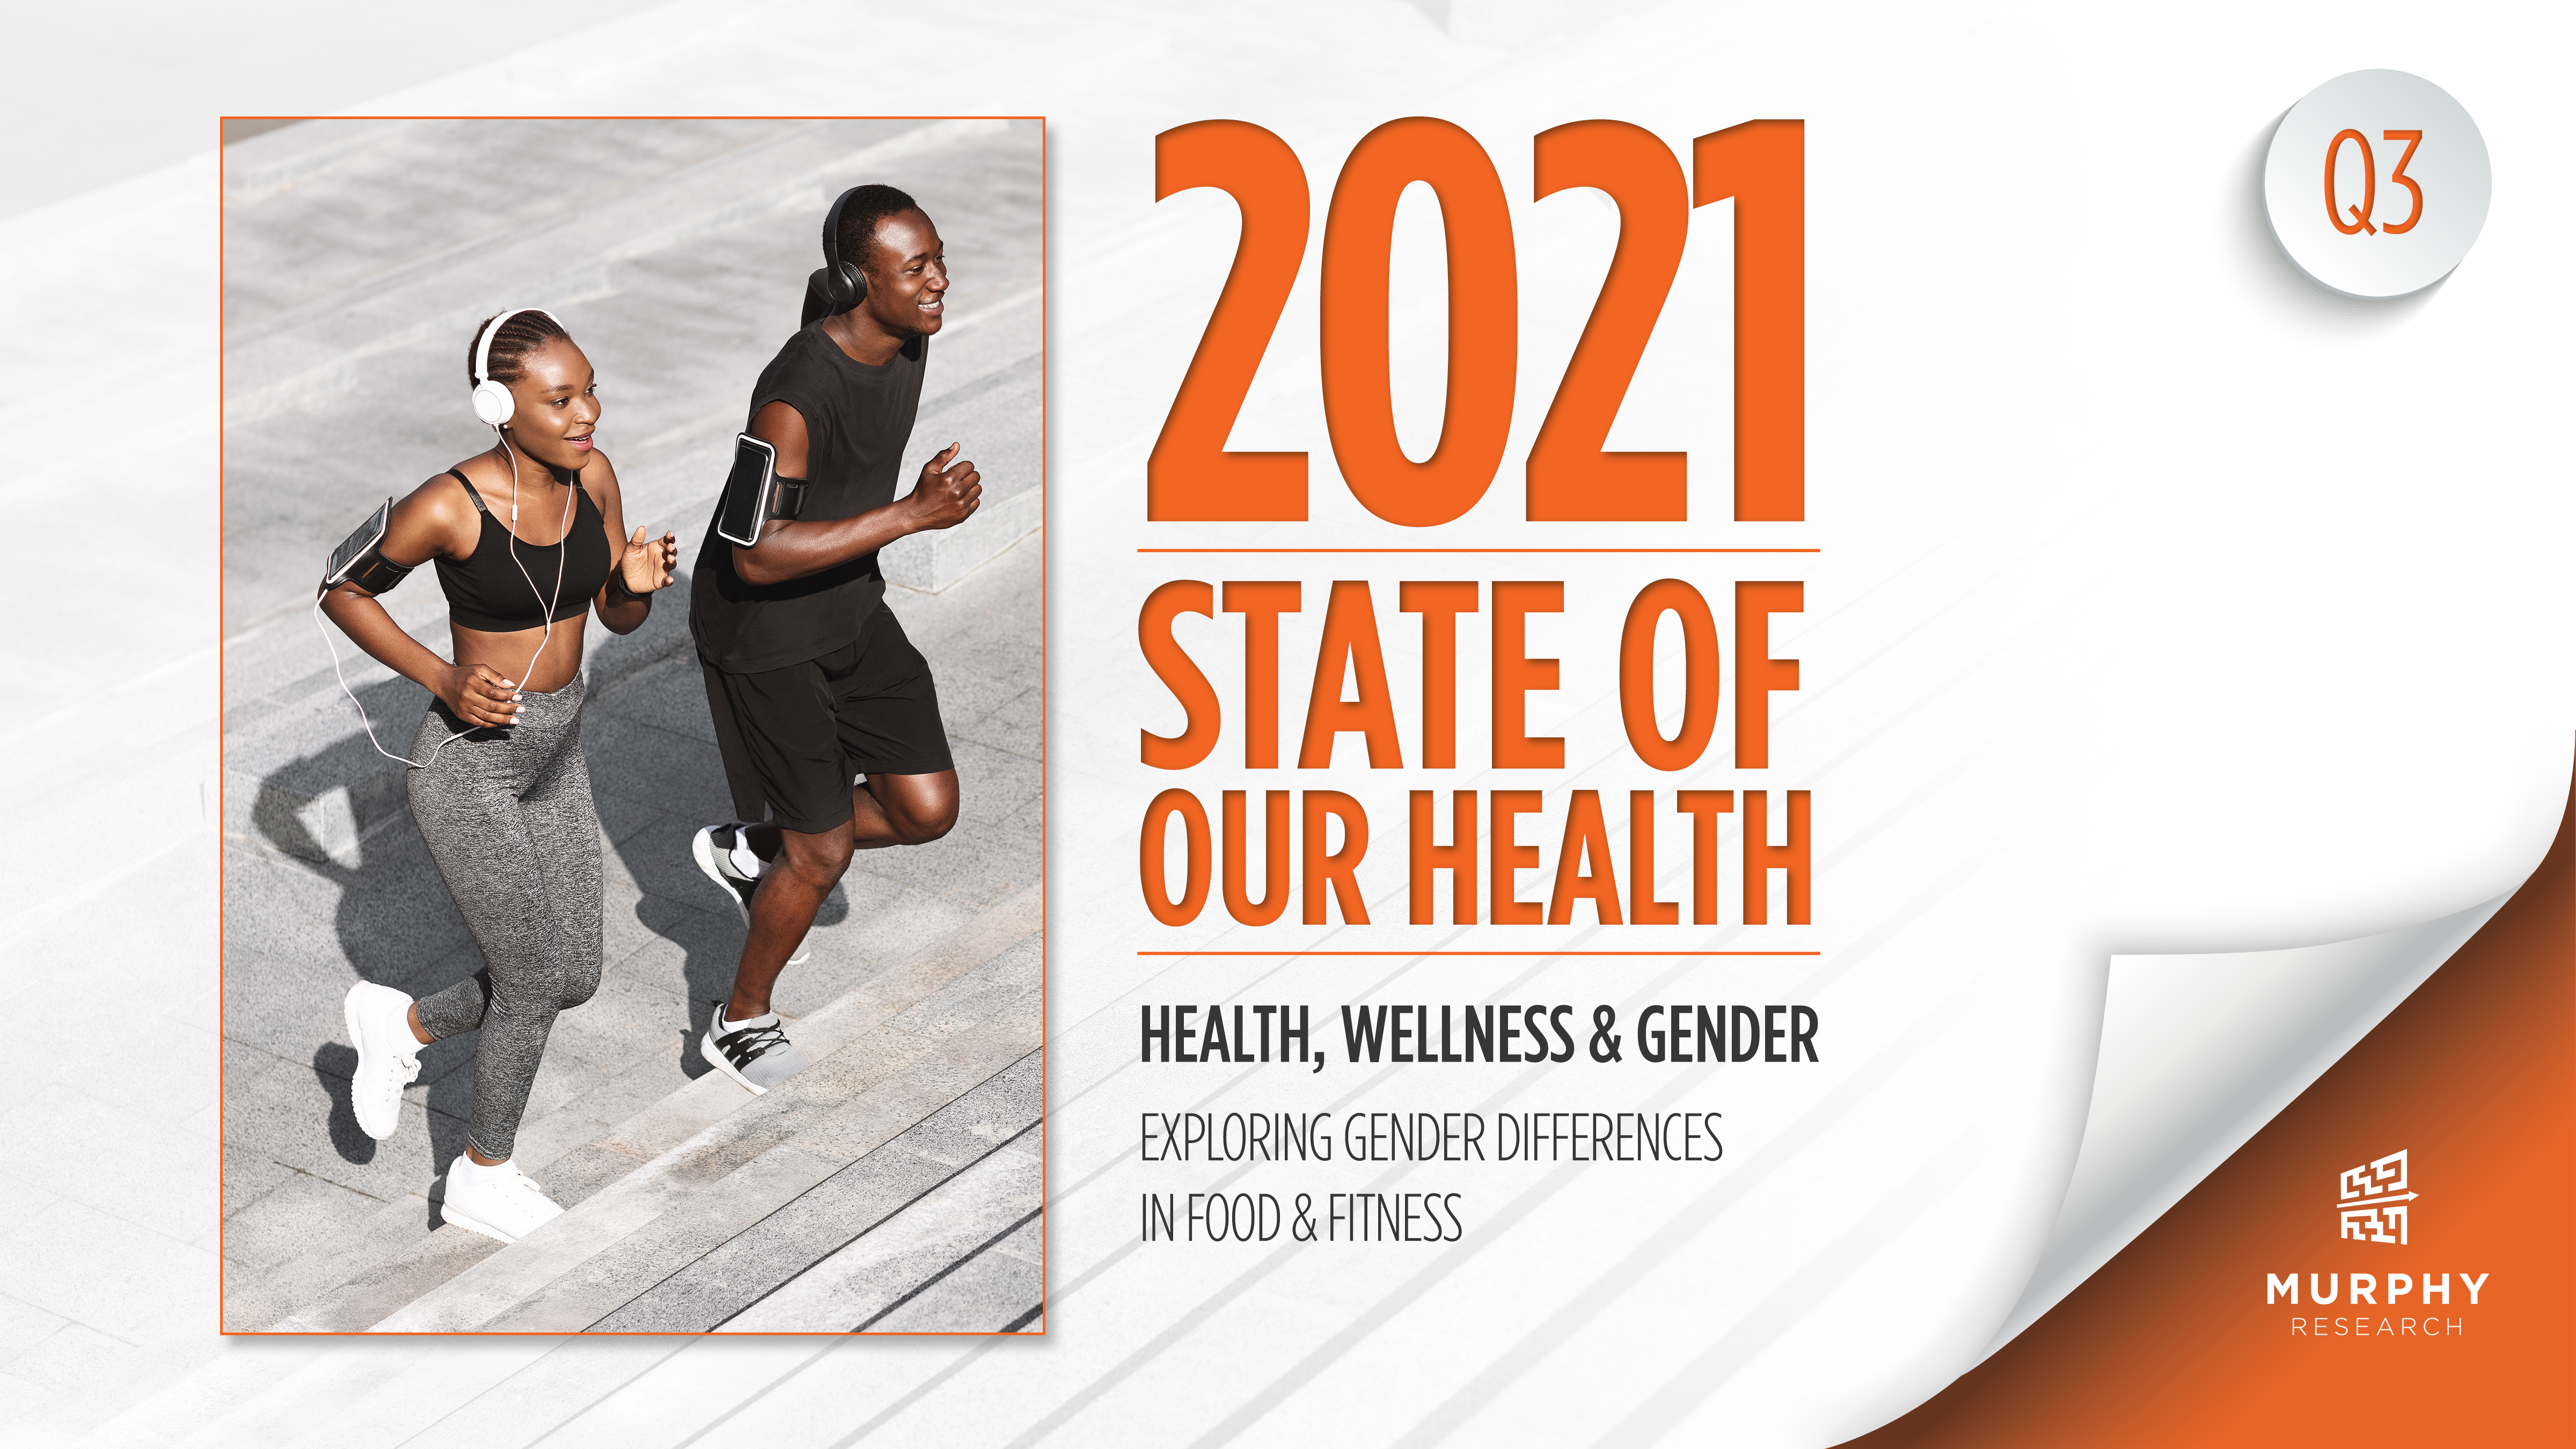 State of Our Health Q3 2021: Health, Wellness, & Gender: Exploring Gender Differences in Food and Fitness